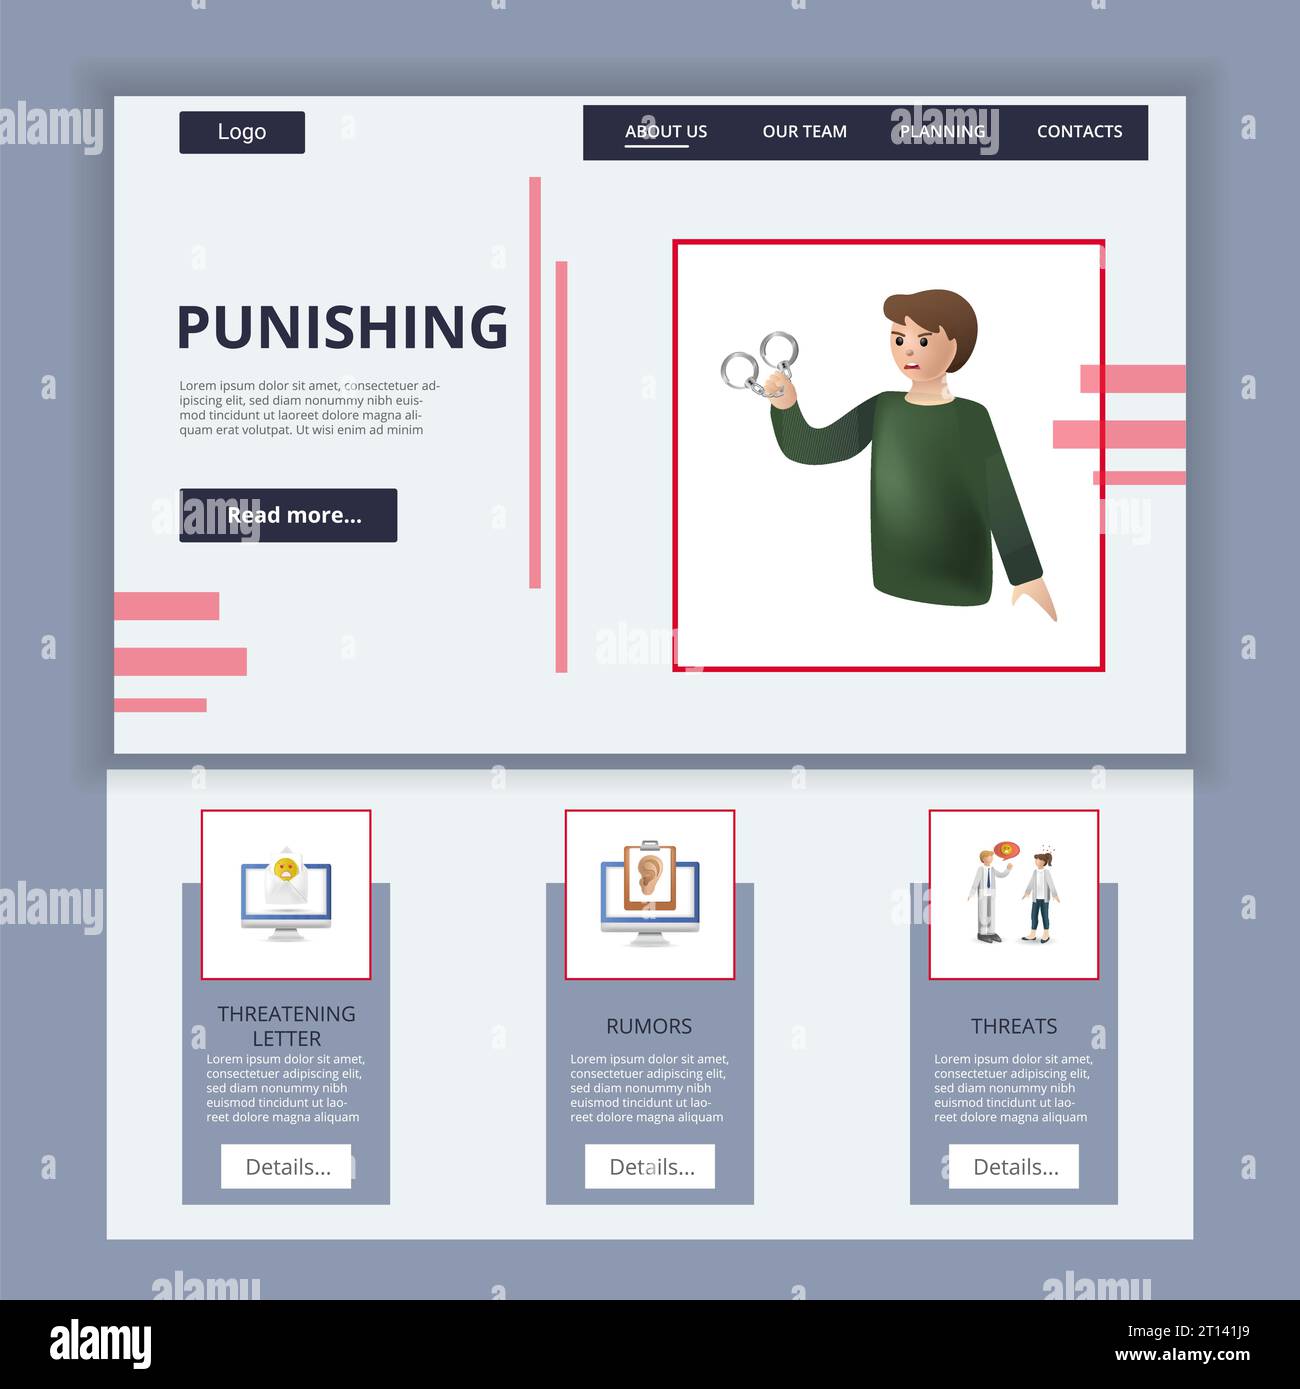 Punishing flat landing page website template. Threatening letter, rumors, threats. Web banner with header, content and footer. Vector illustration. Stock Vector